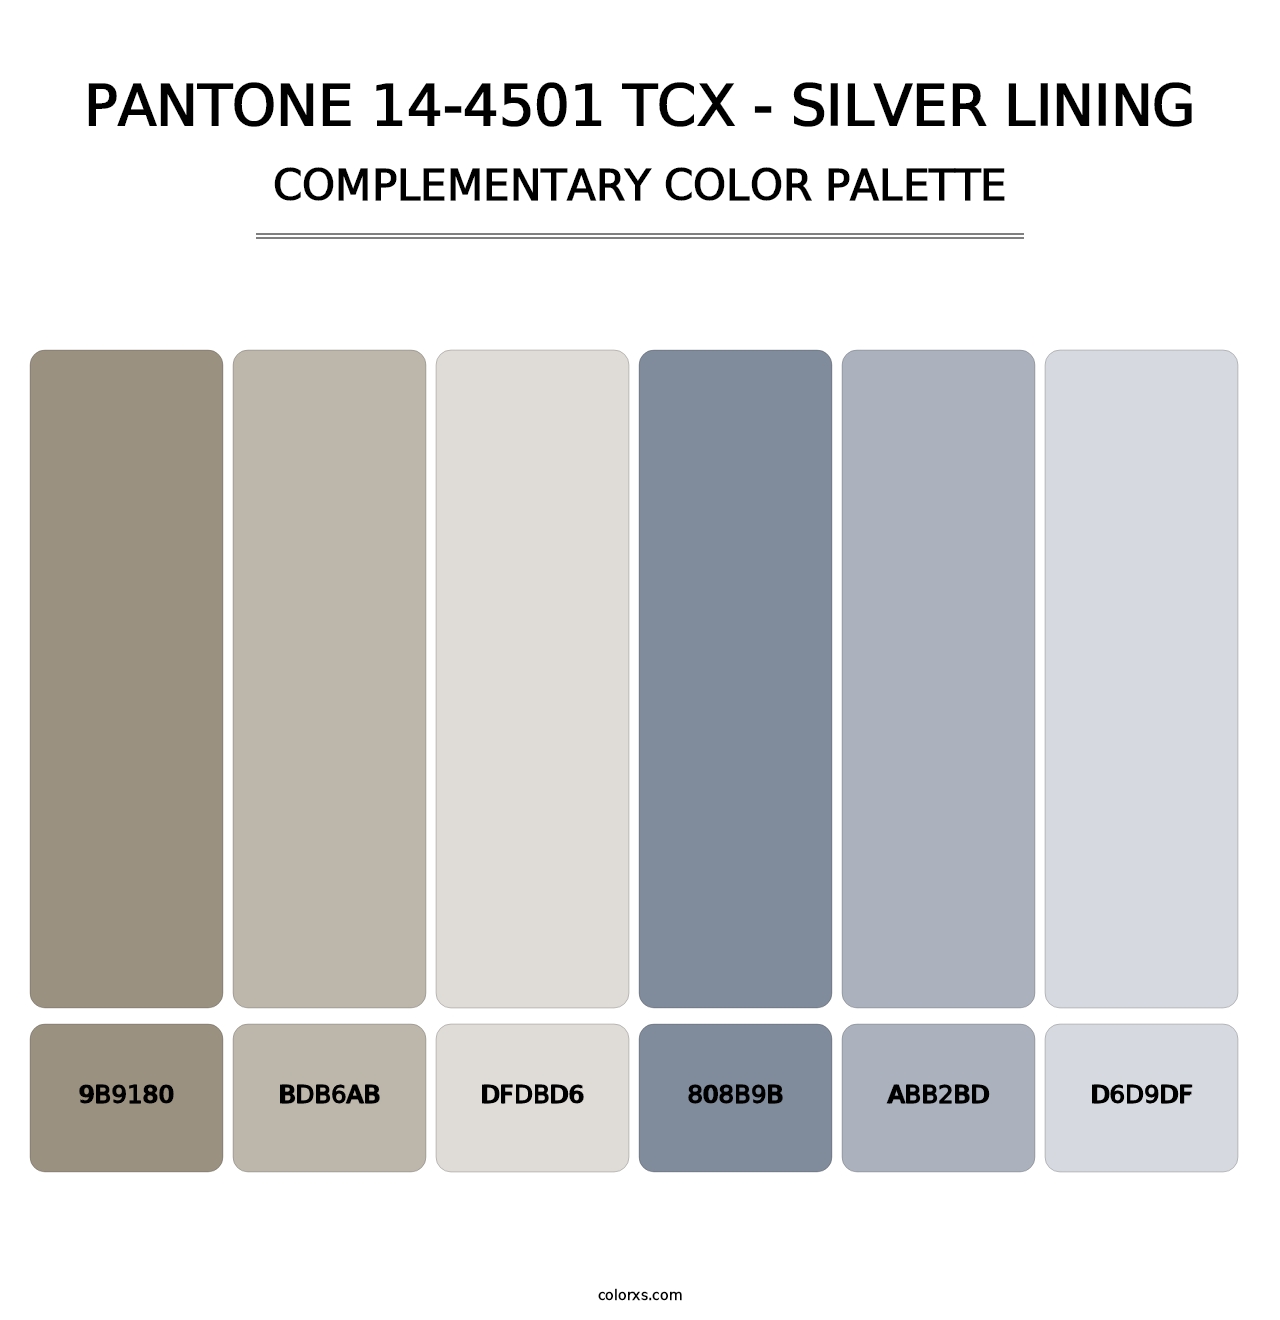 PANTONE 14-4501 TCX - Silver Lining - Complementary Color Palette